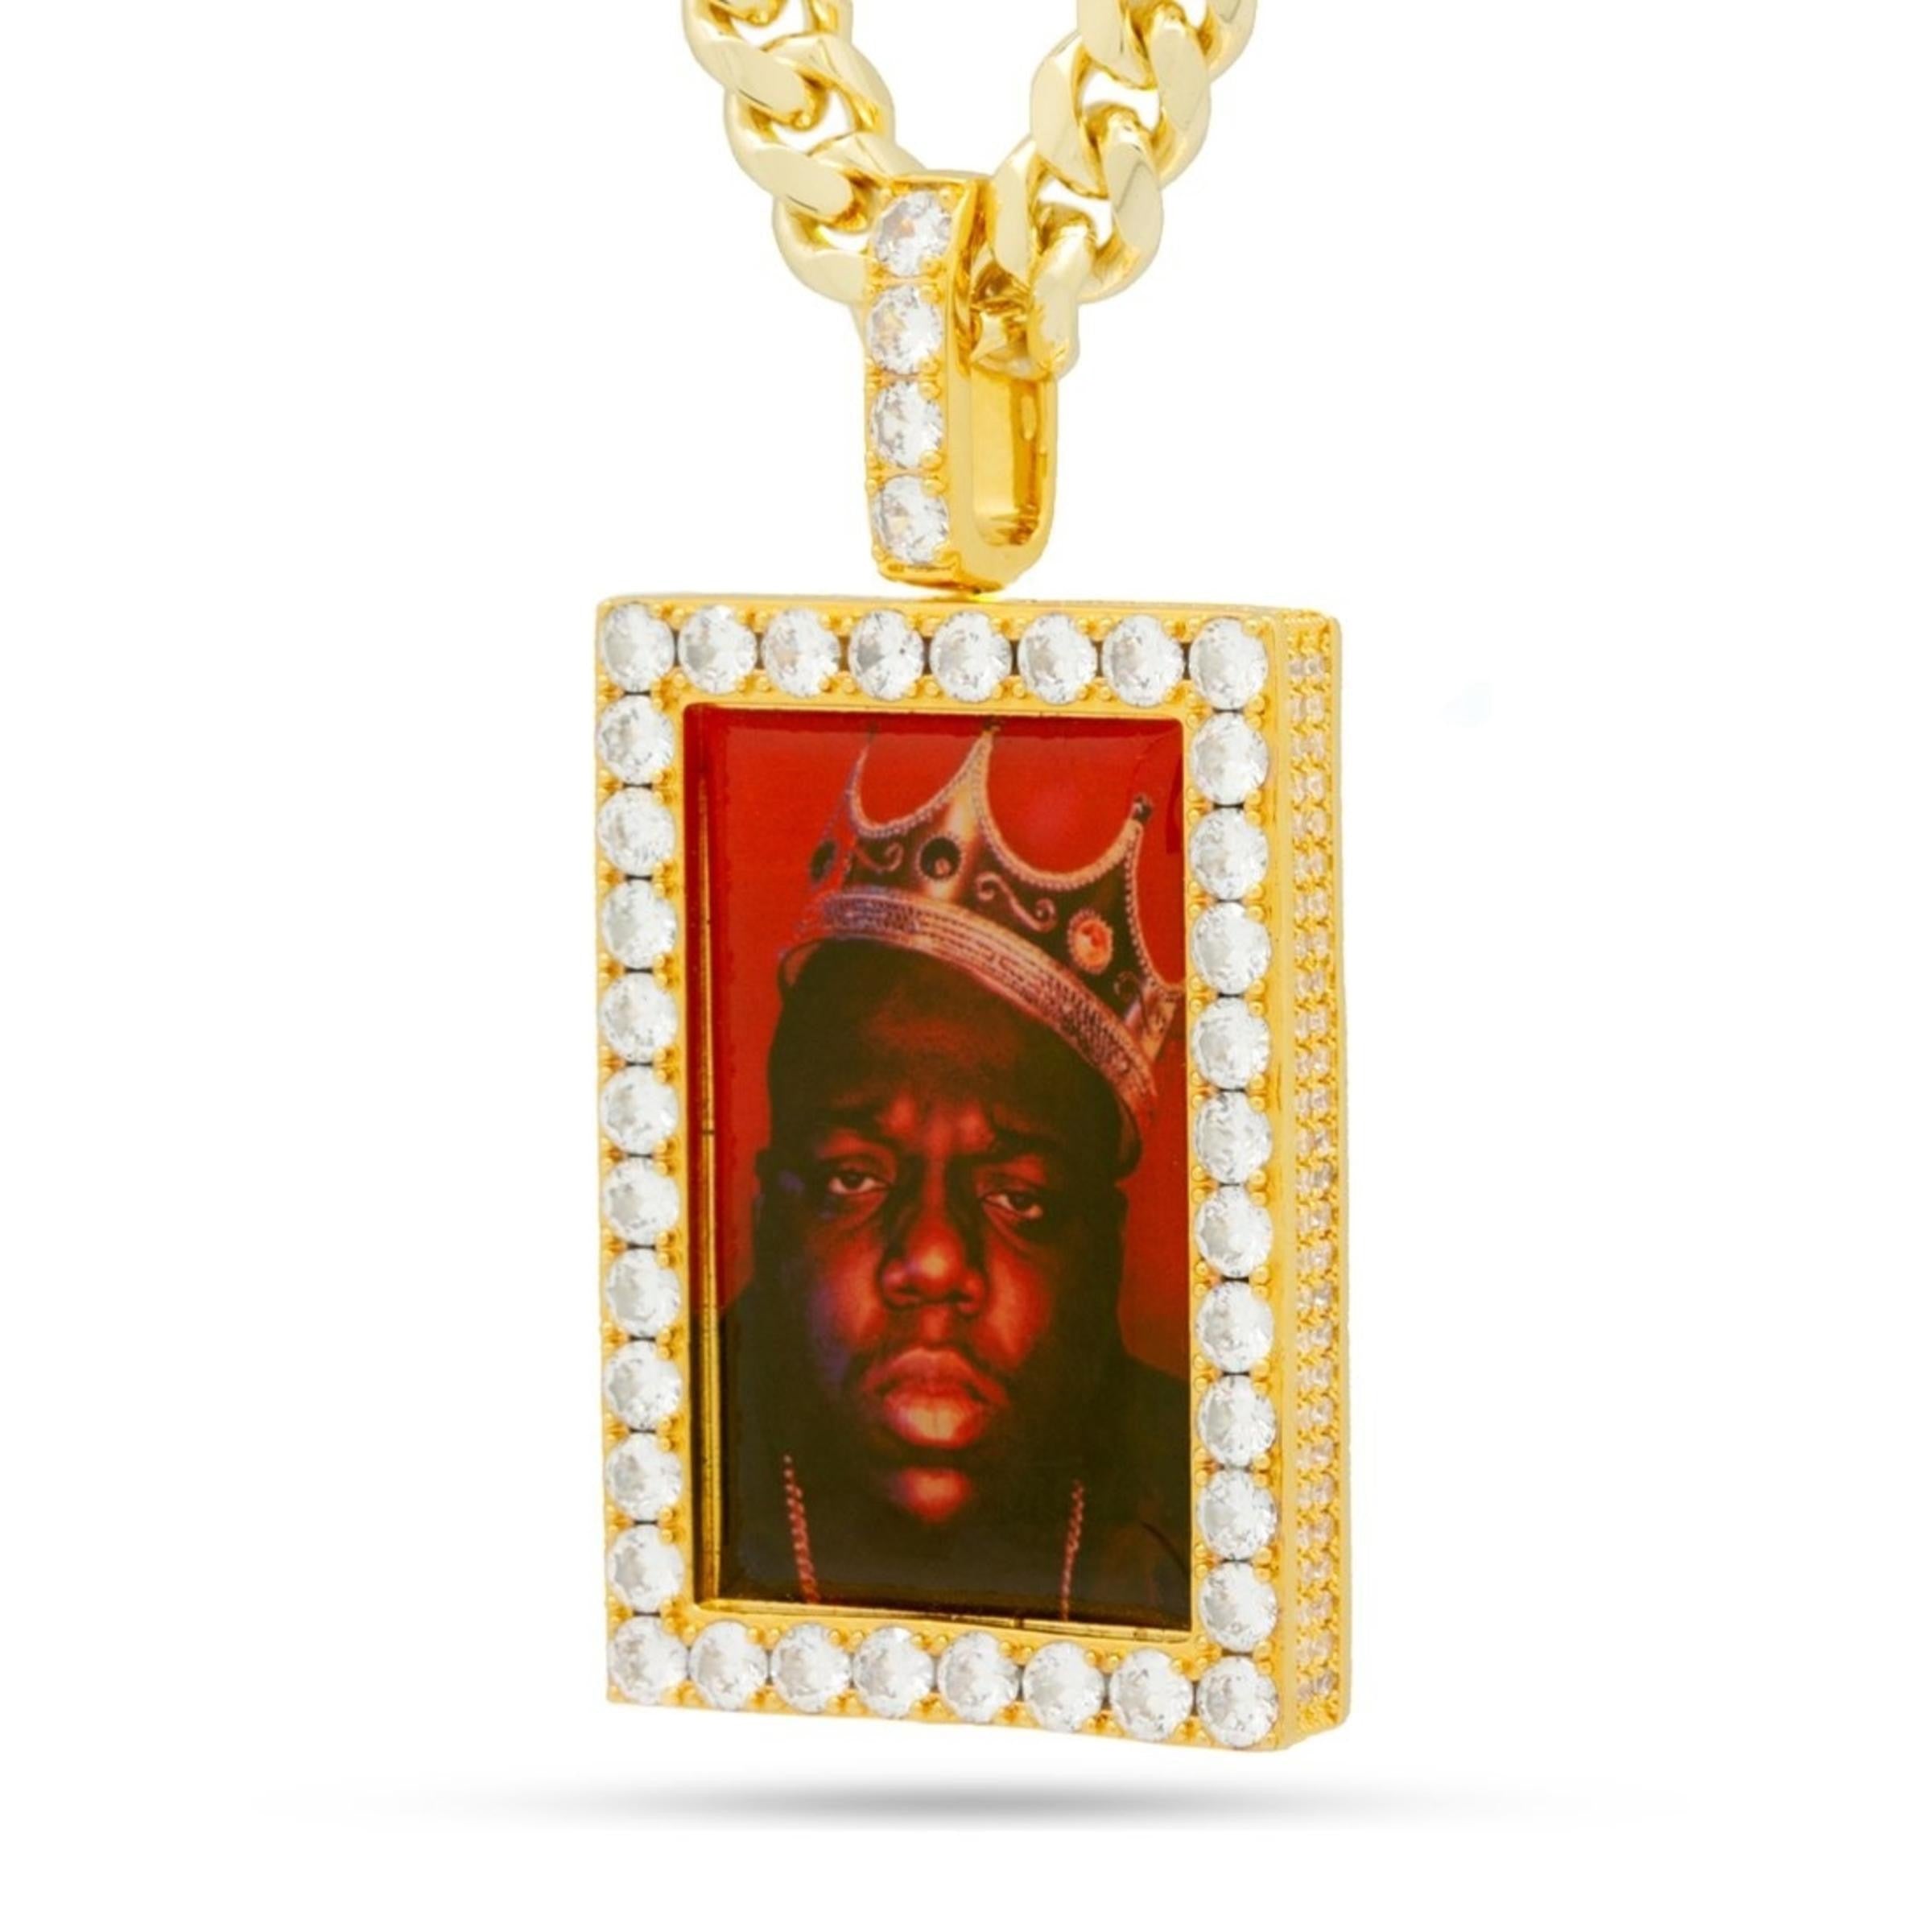 KingIce Notorious B.I.G. x King Ice - The King of New York Necklace